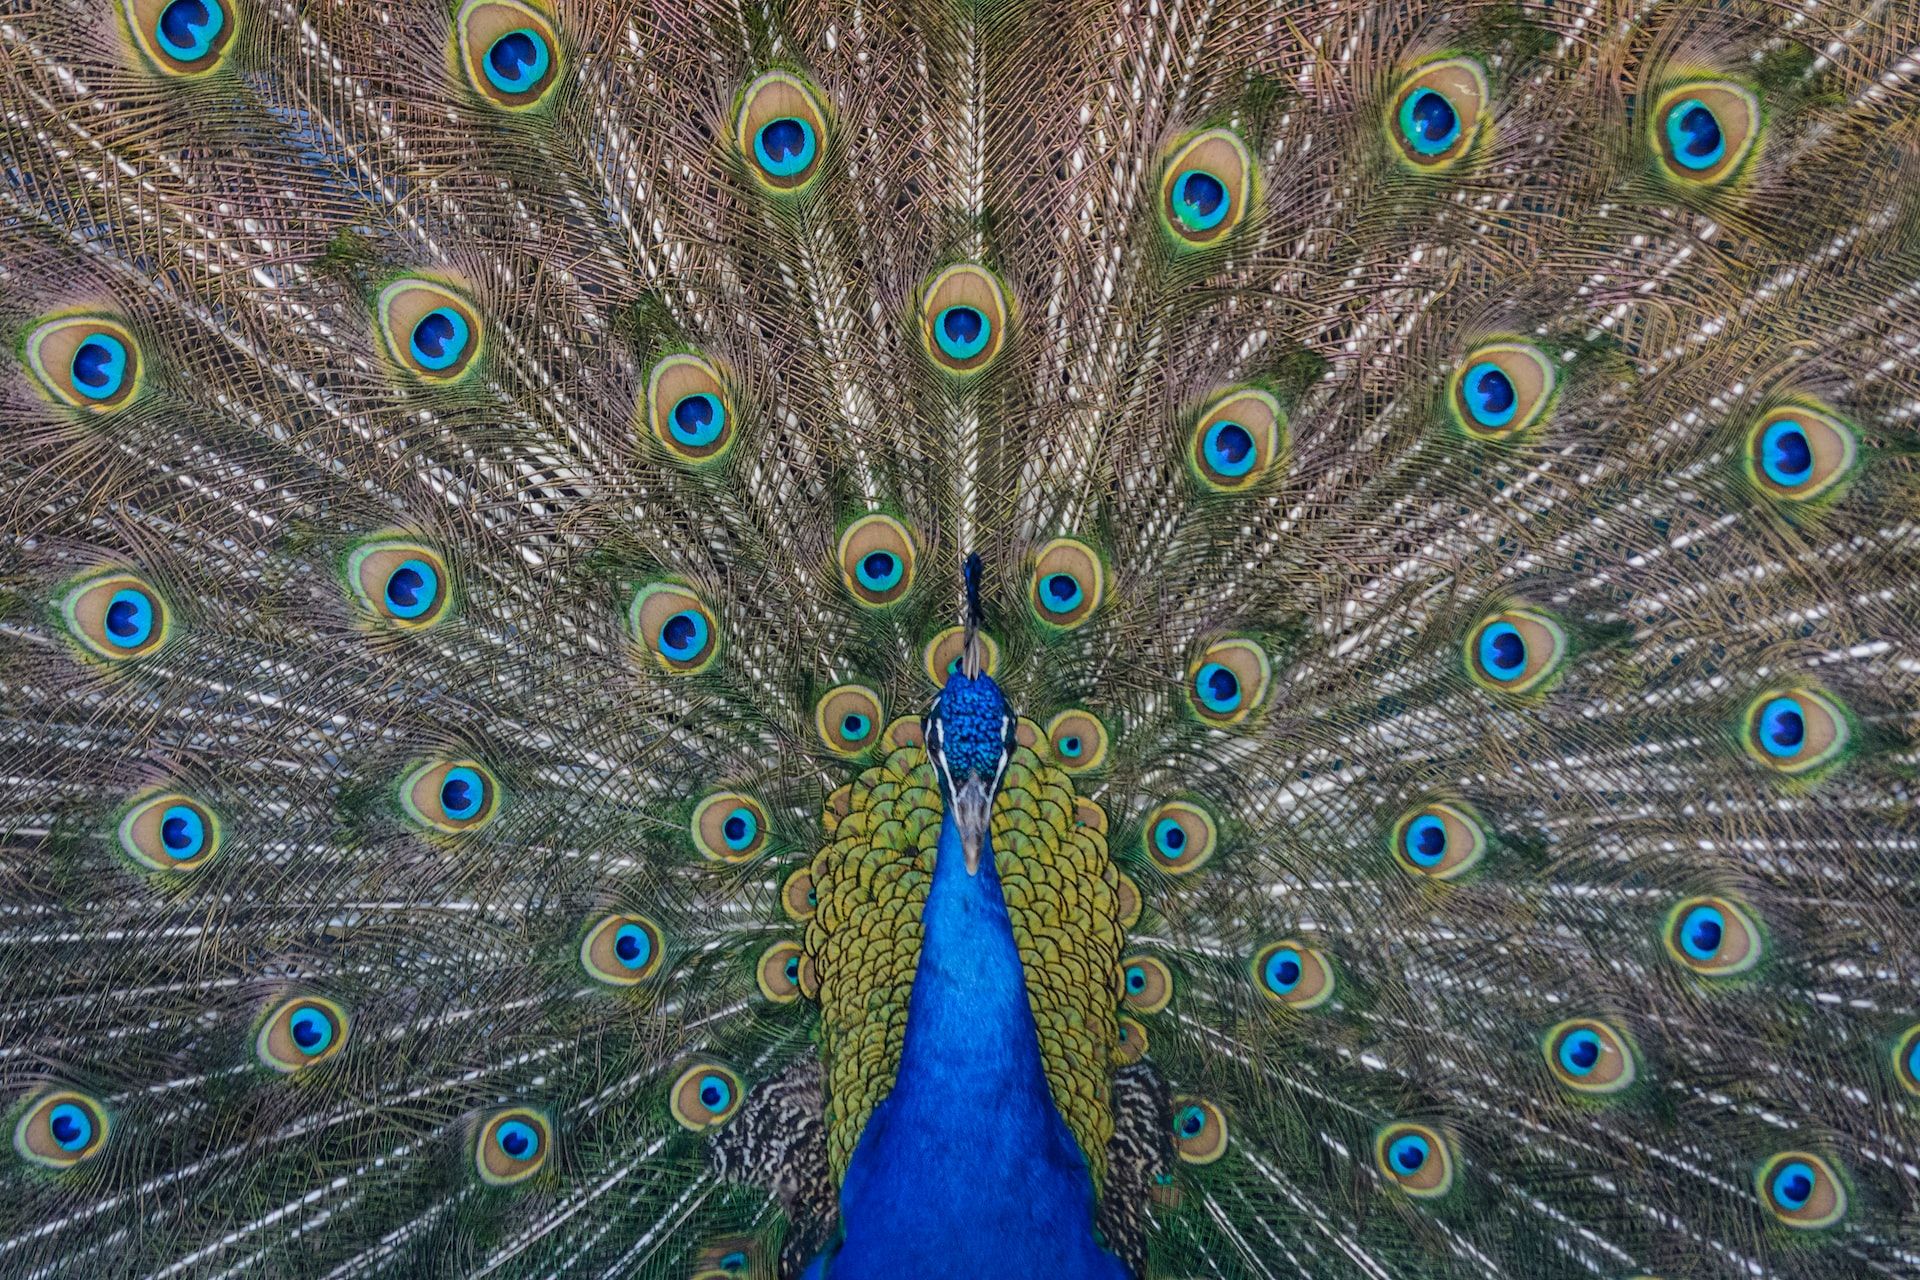 A peacock displaying its tail